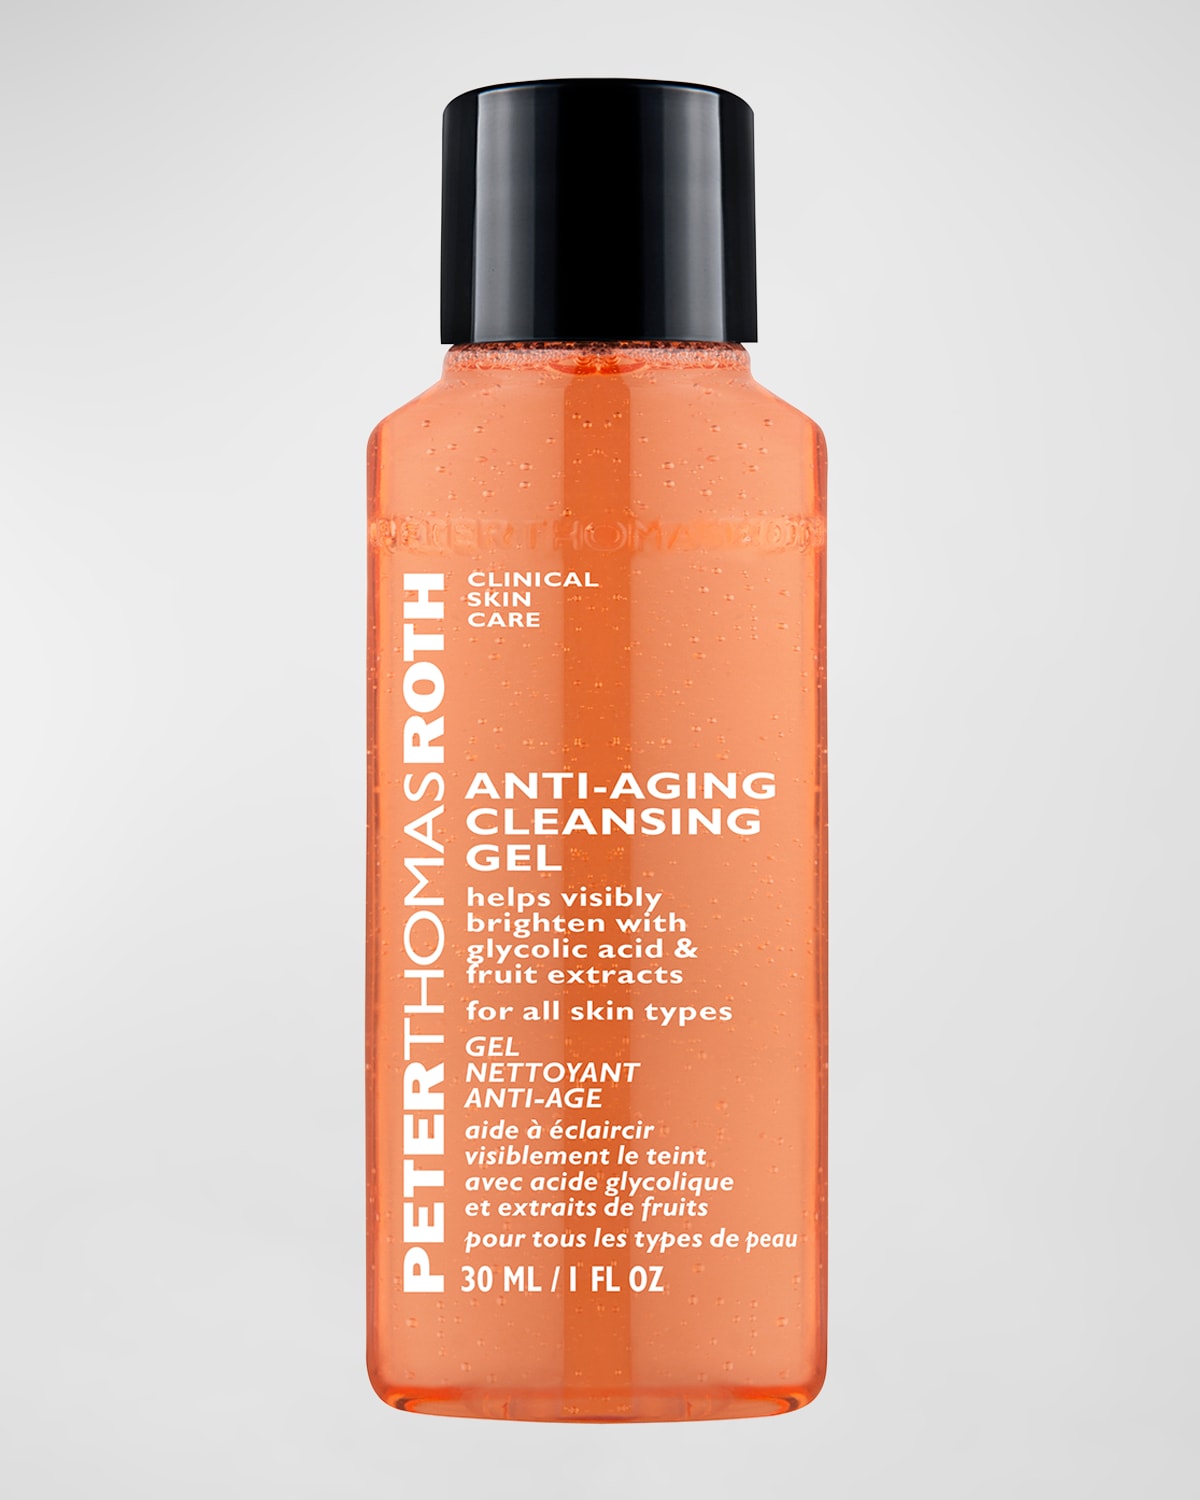 Anti-Aging Cleansing Gel, 1 oz. - Yours with any $50 Peter Thomas Roth Purchase